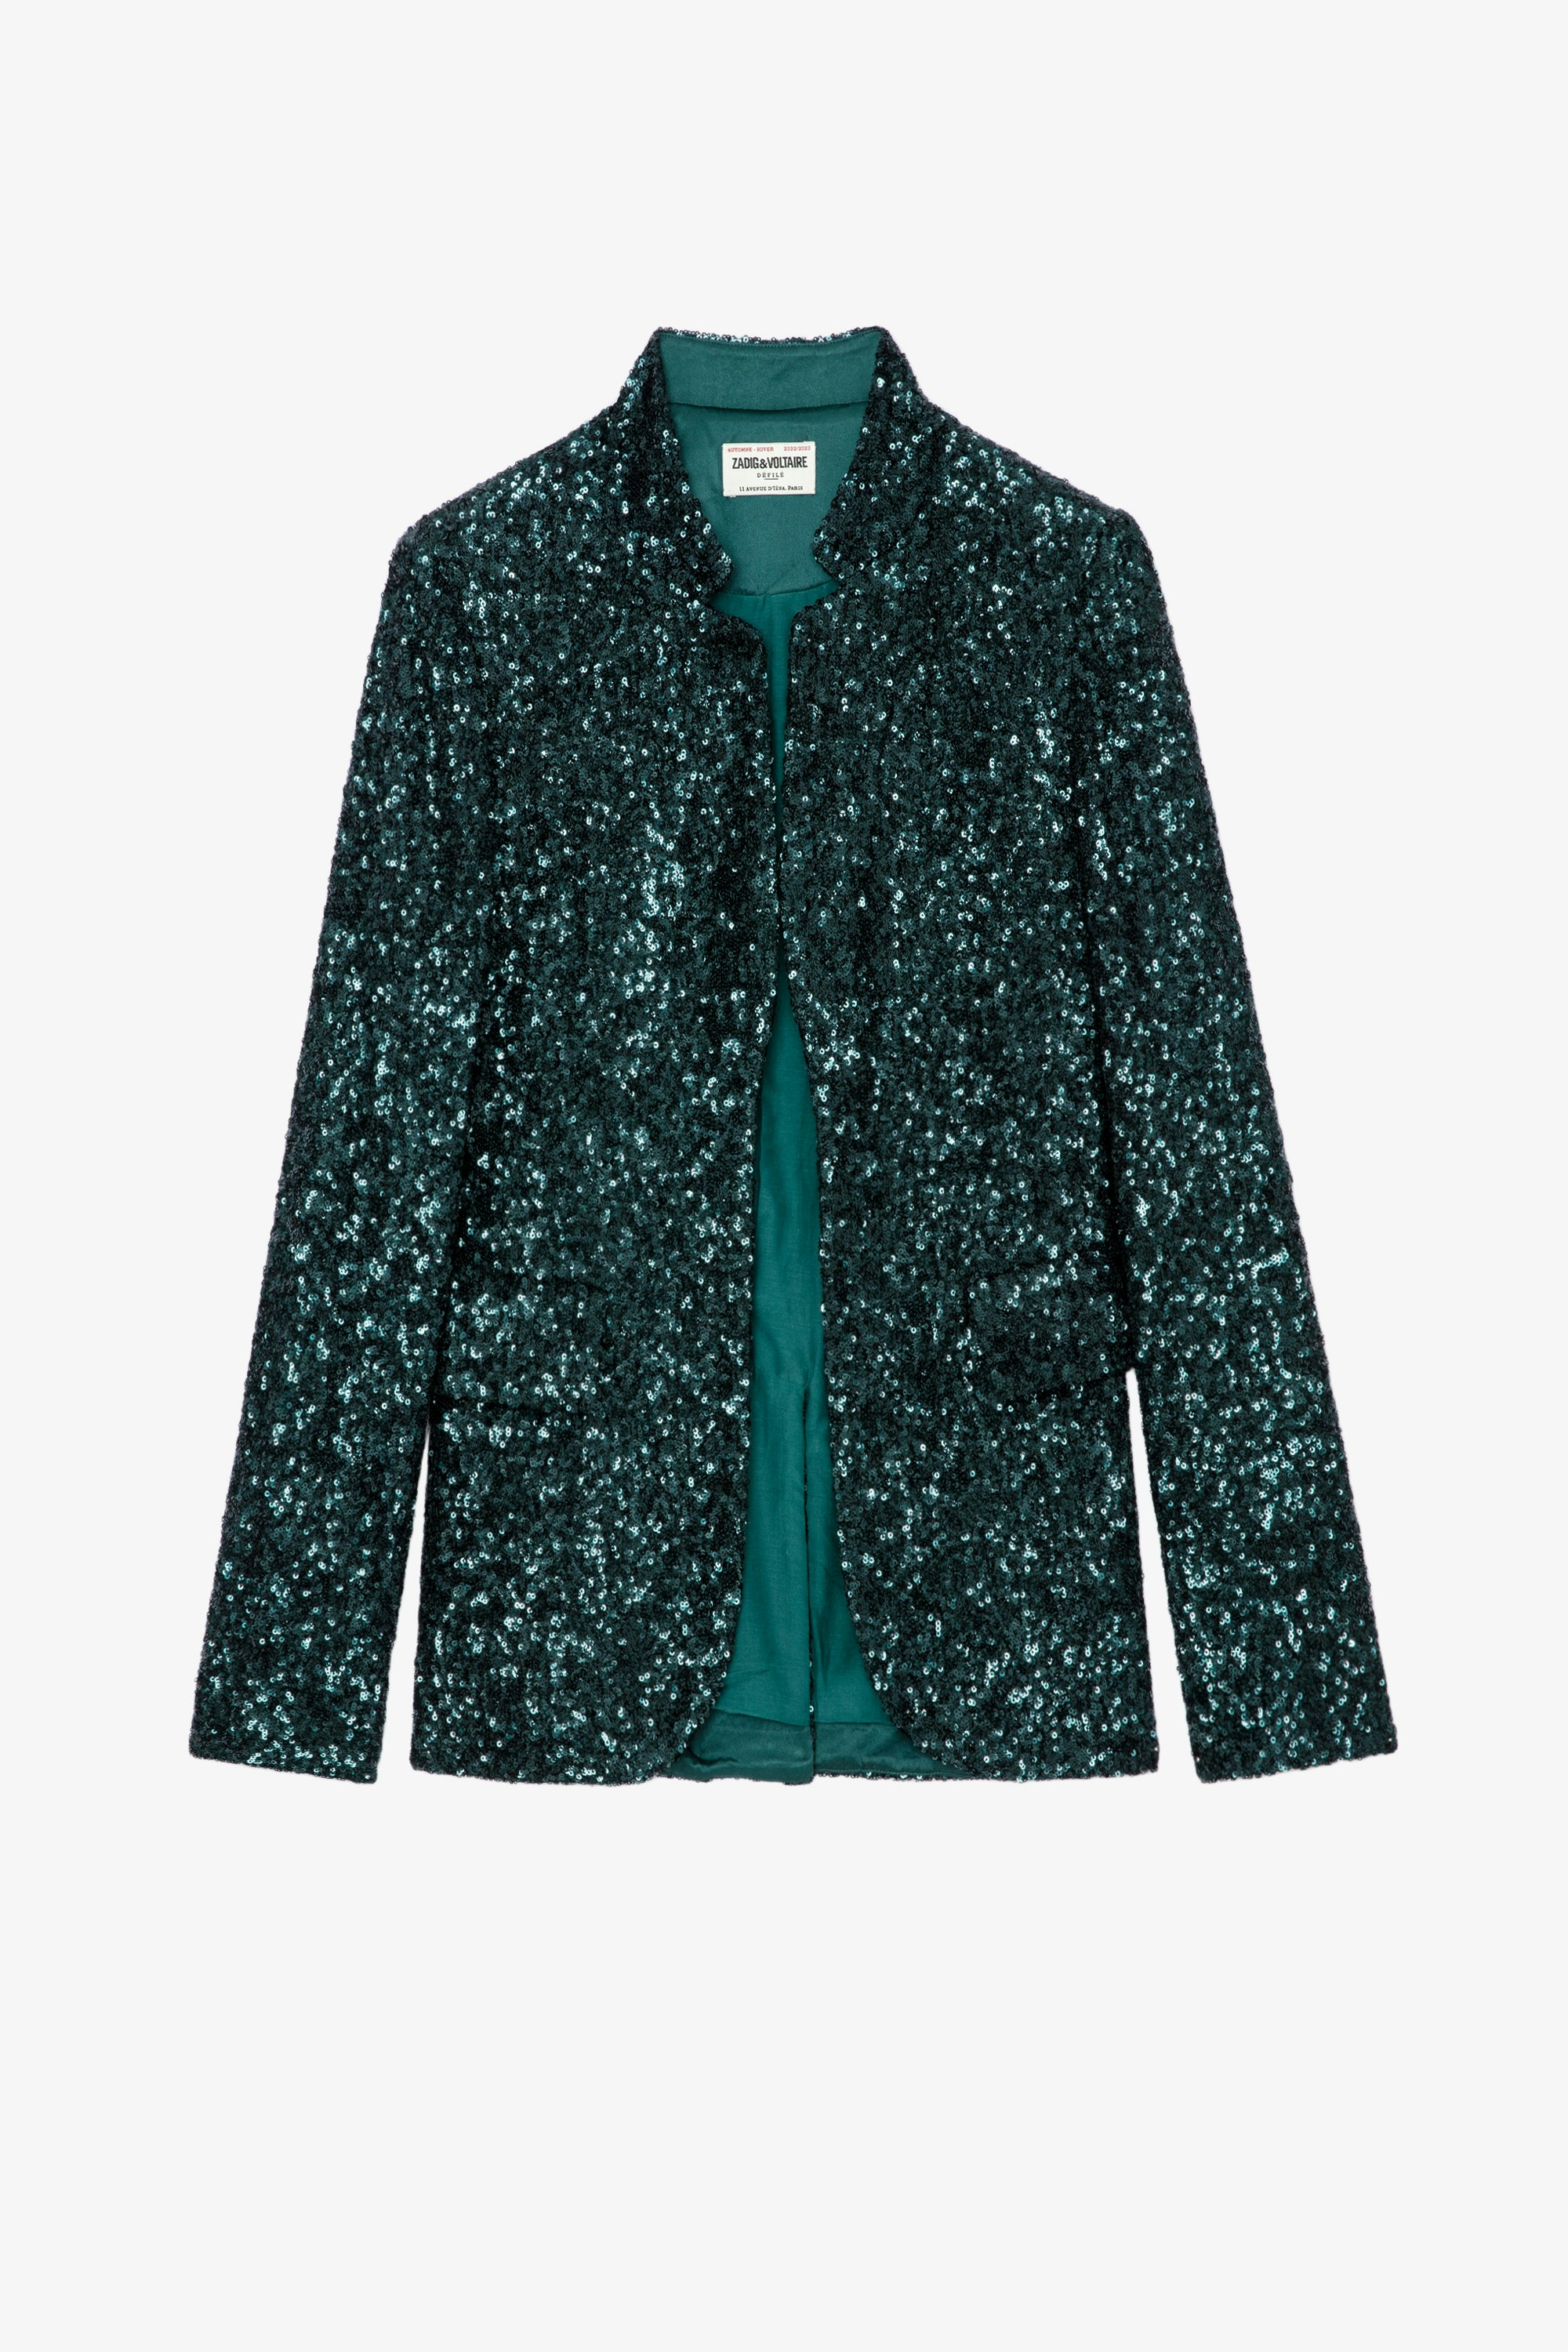 Very Sequins Jacket Women's tailored jacket with all-over green sequins